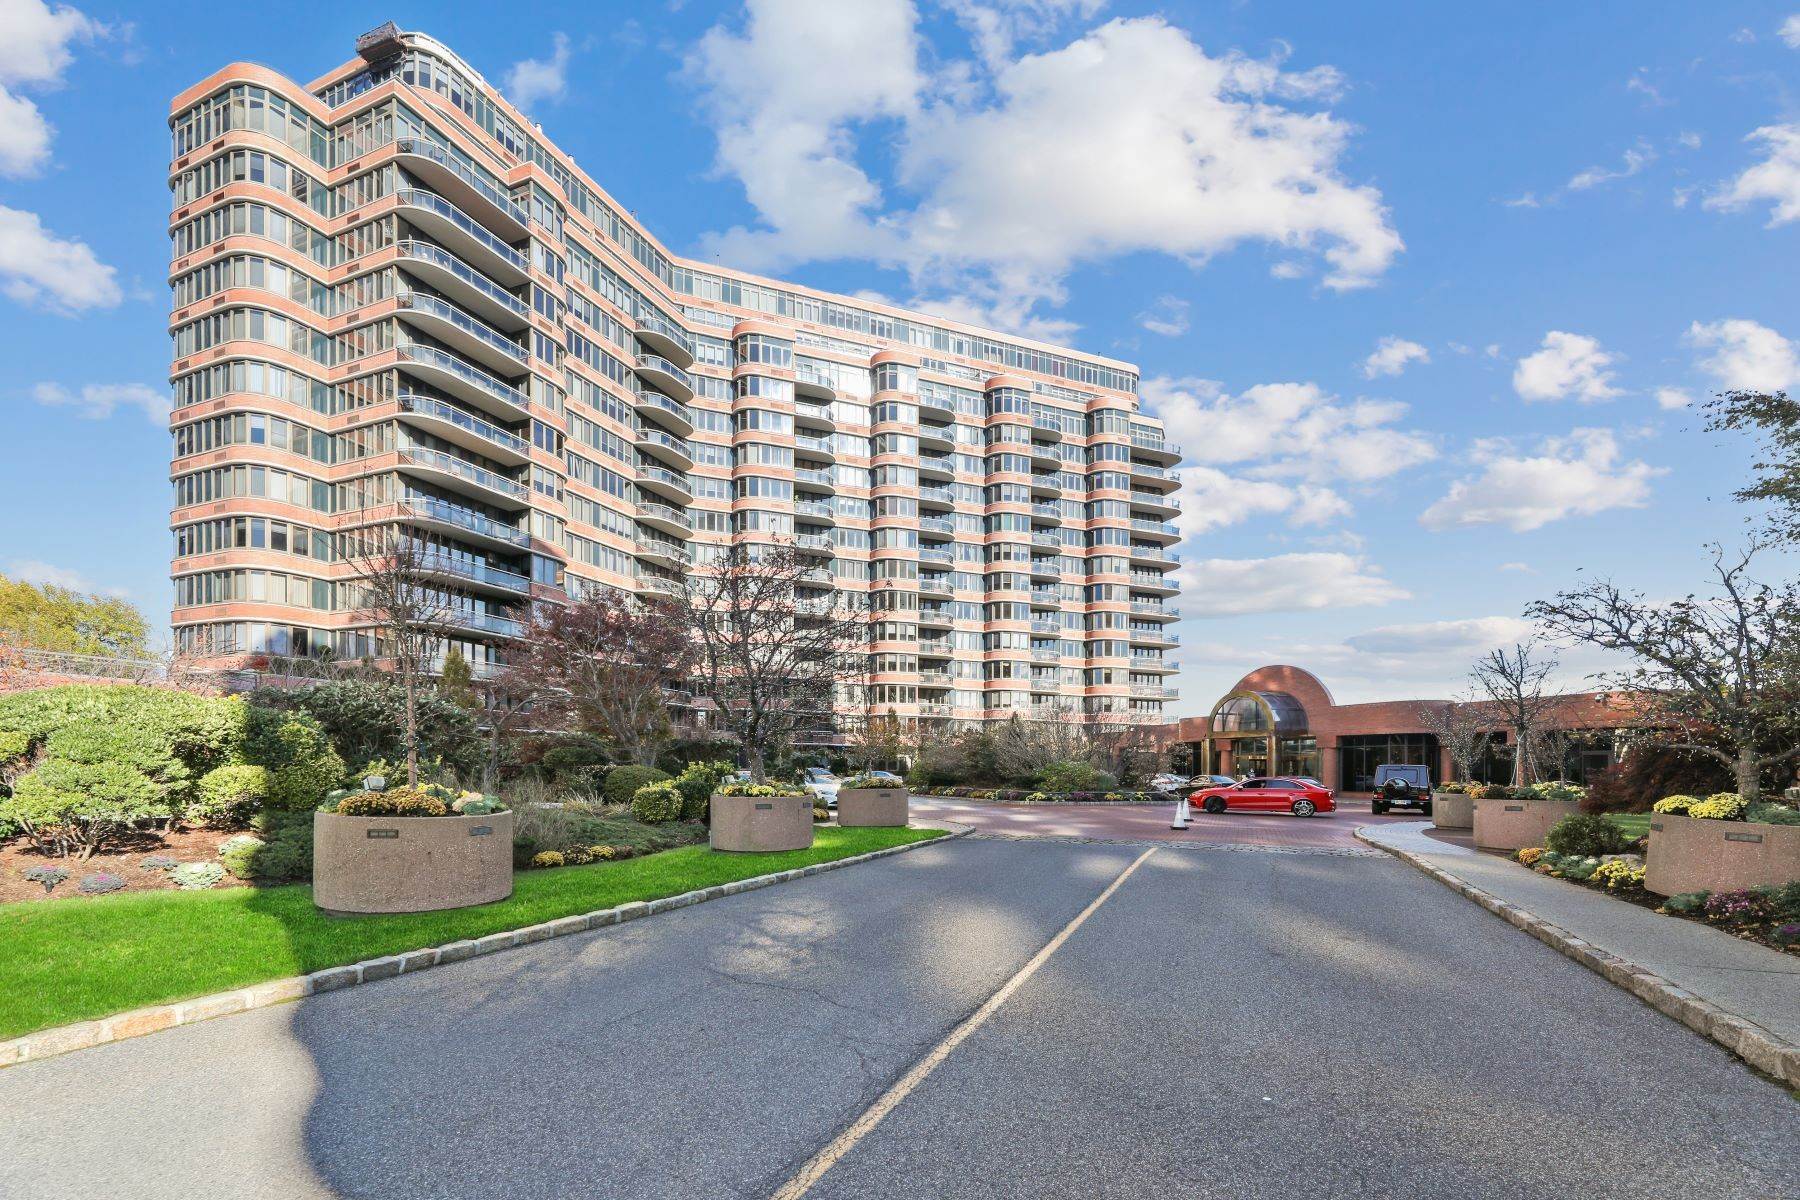 Condominiums for Sale at Carlyle Towers 100 N Carlyle Dr 6LN Cliffside Park, New Jersey 07010 United States